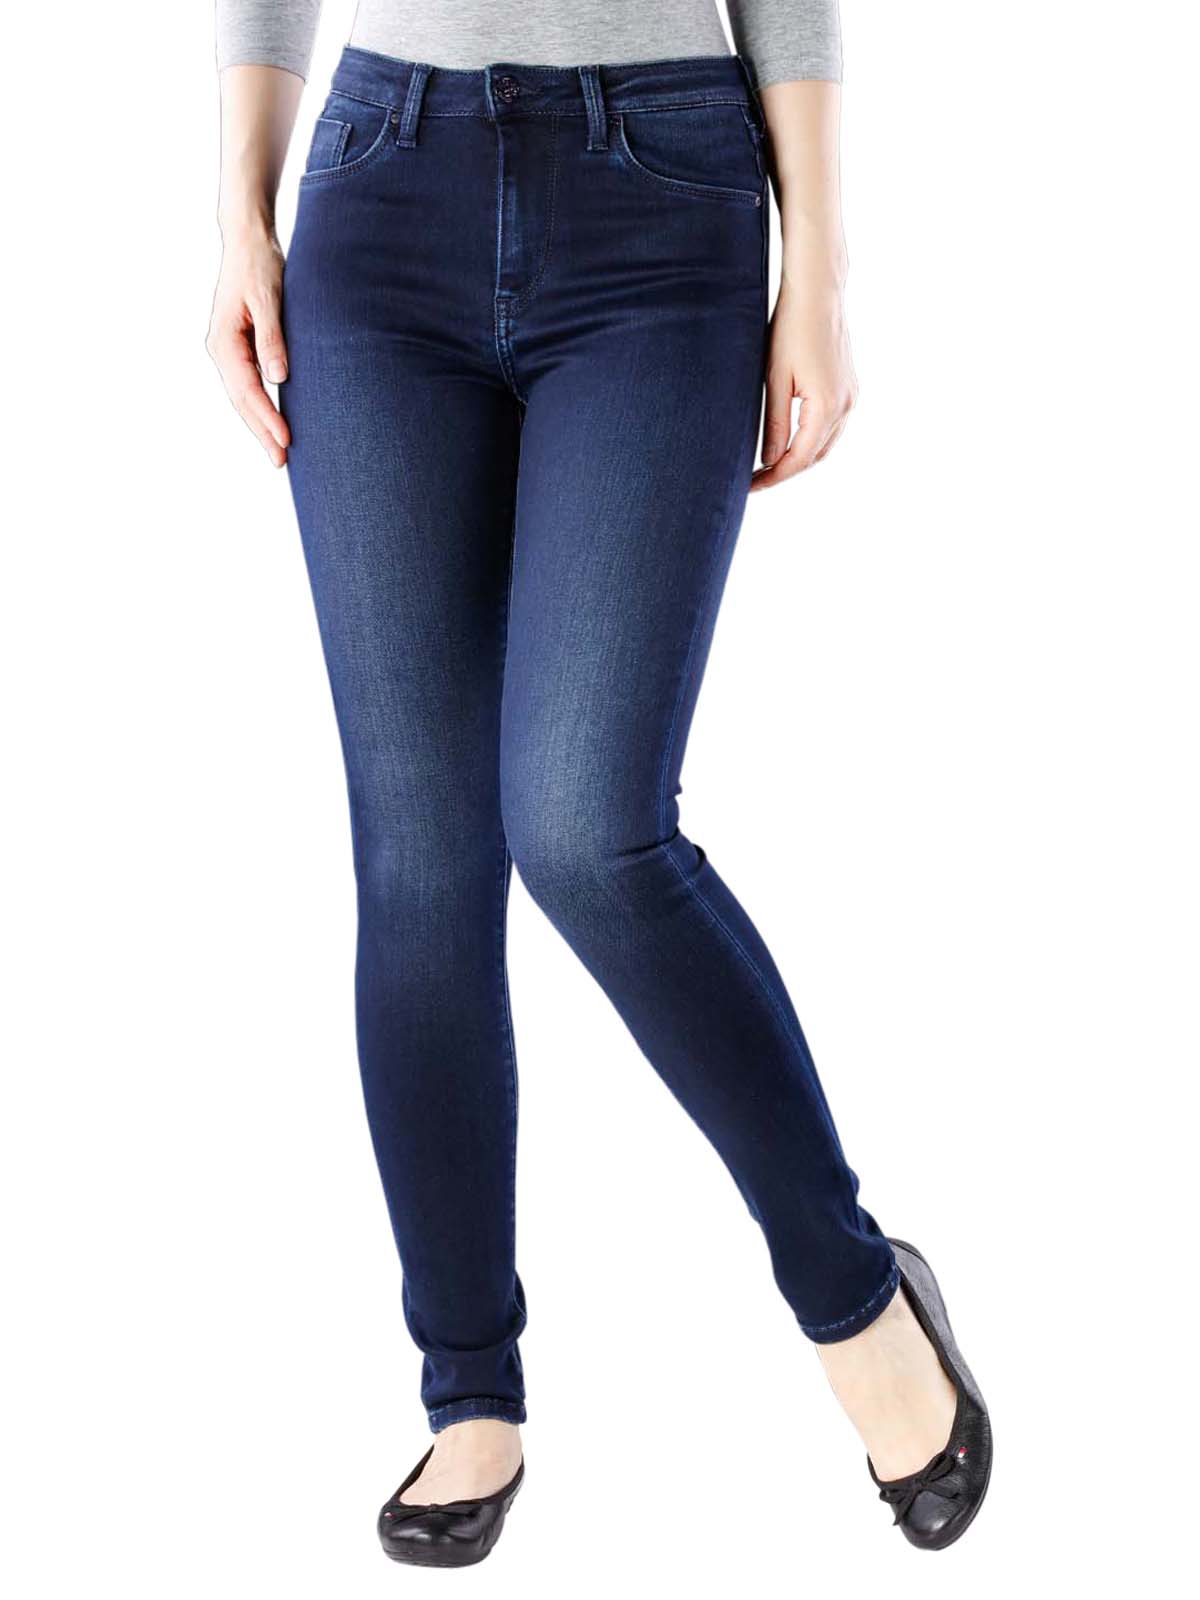 Pepe Jeans Slim Fit CA5 Pepe Jeans Women's Jeans | Free Shipping on BEBASIC.CH - LOOK GOOD